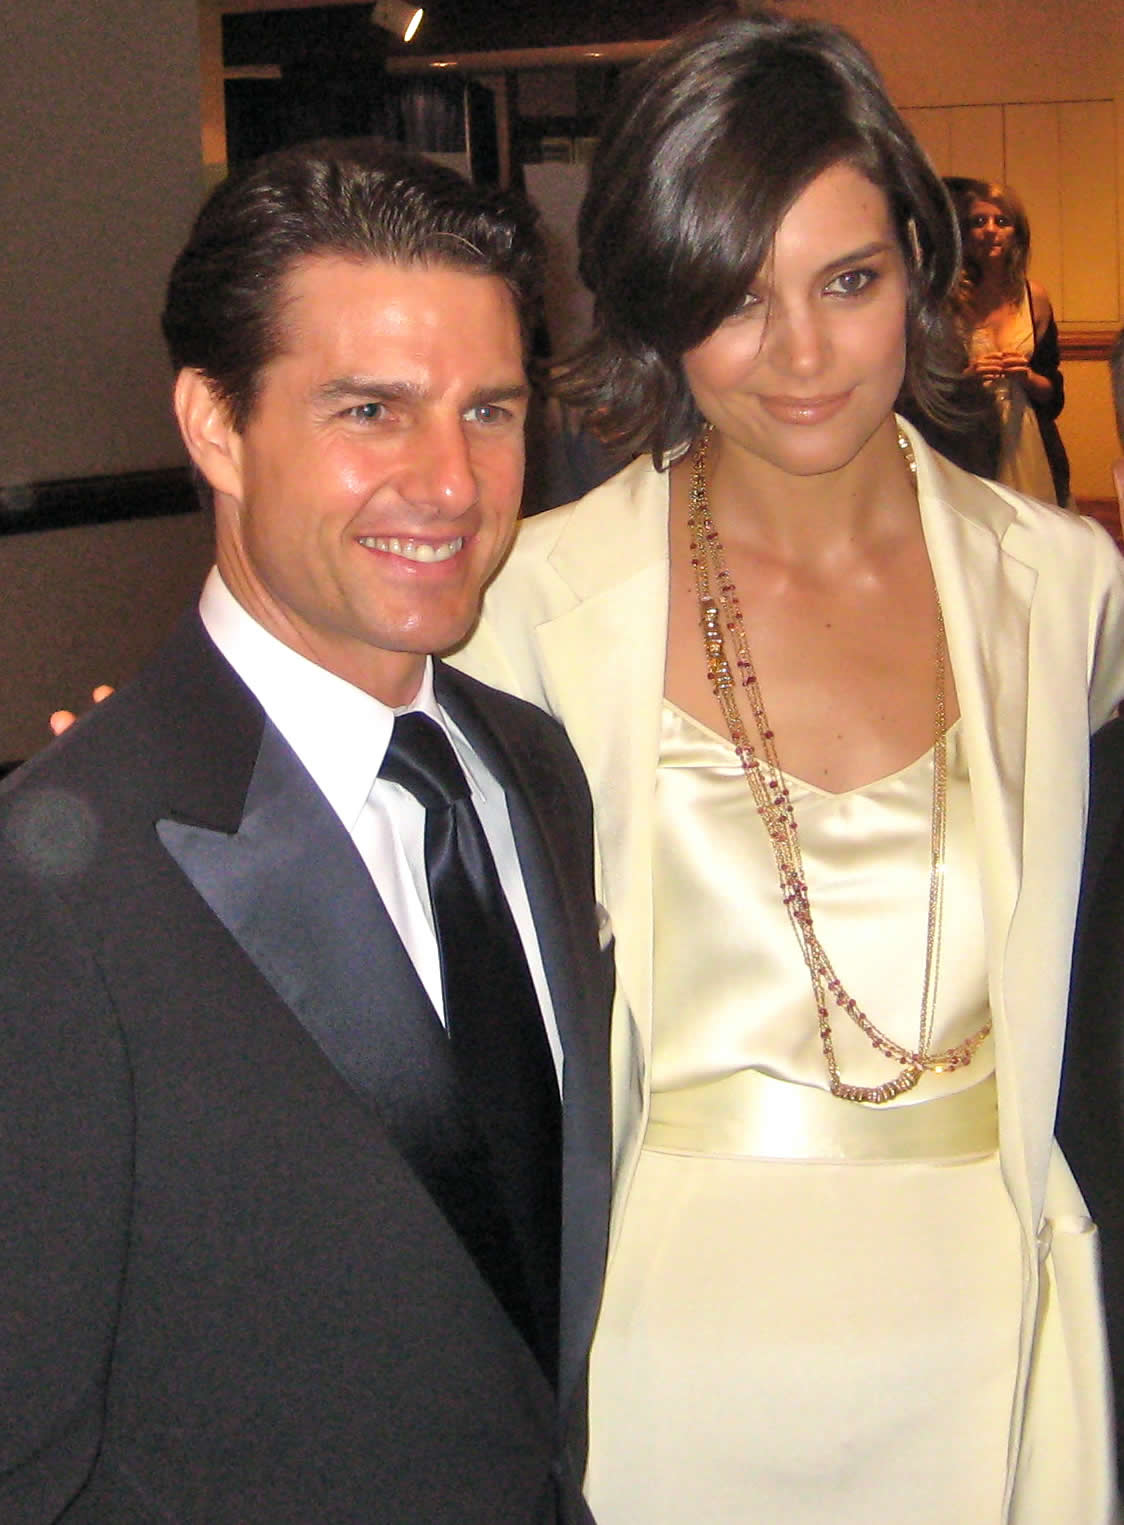 katie holmes and tom cruise height. Katie Holmes - Tom Cruise